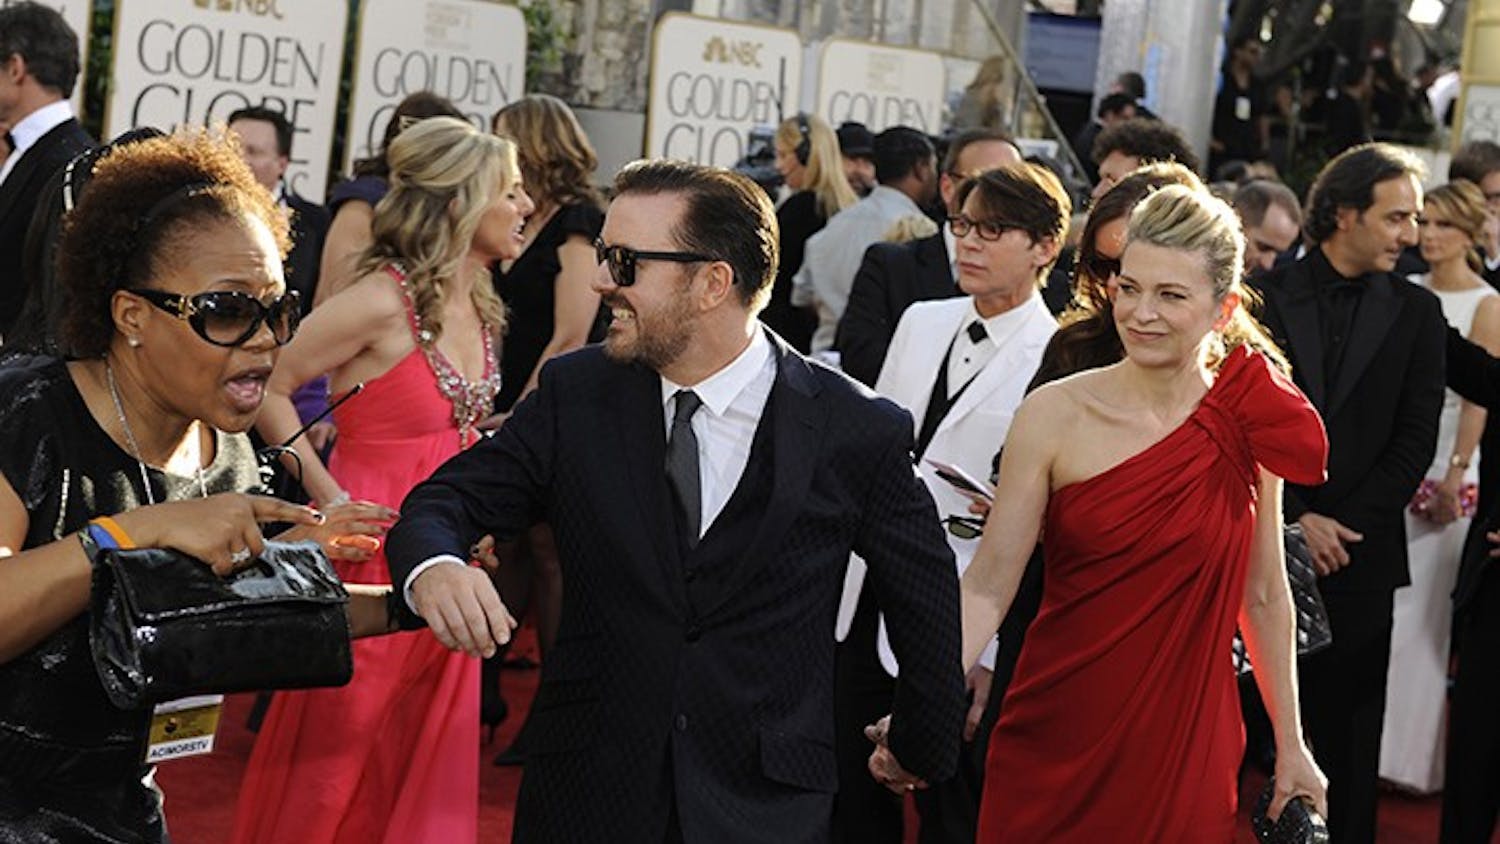 Ricky Gervais arrives at the 68th Annual Golden Globe Awards on Sunday, January 16, 2011, at the Beverly Hilton Hotel in Beverly Hills, California. (Wally Skalij/Los Angeles Times/MCT)